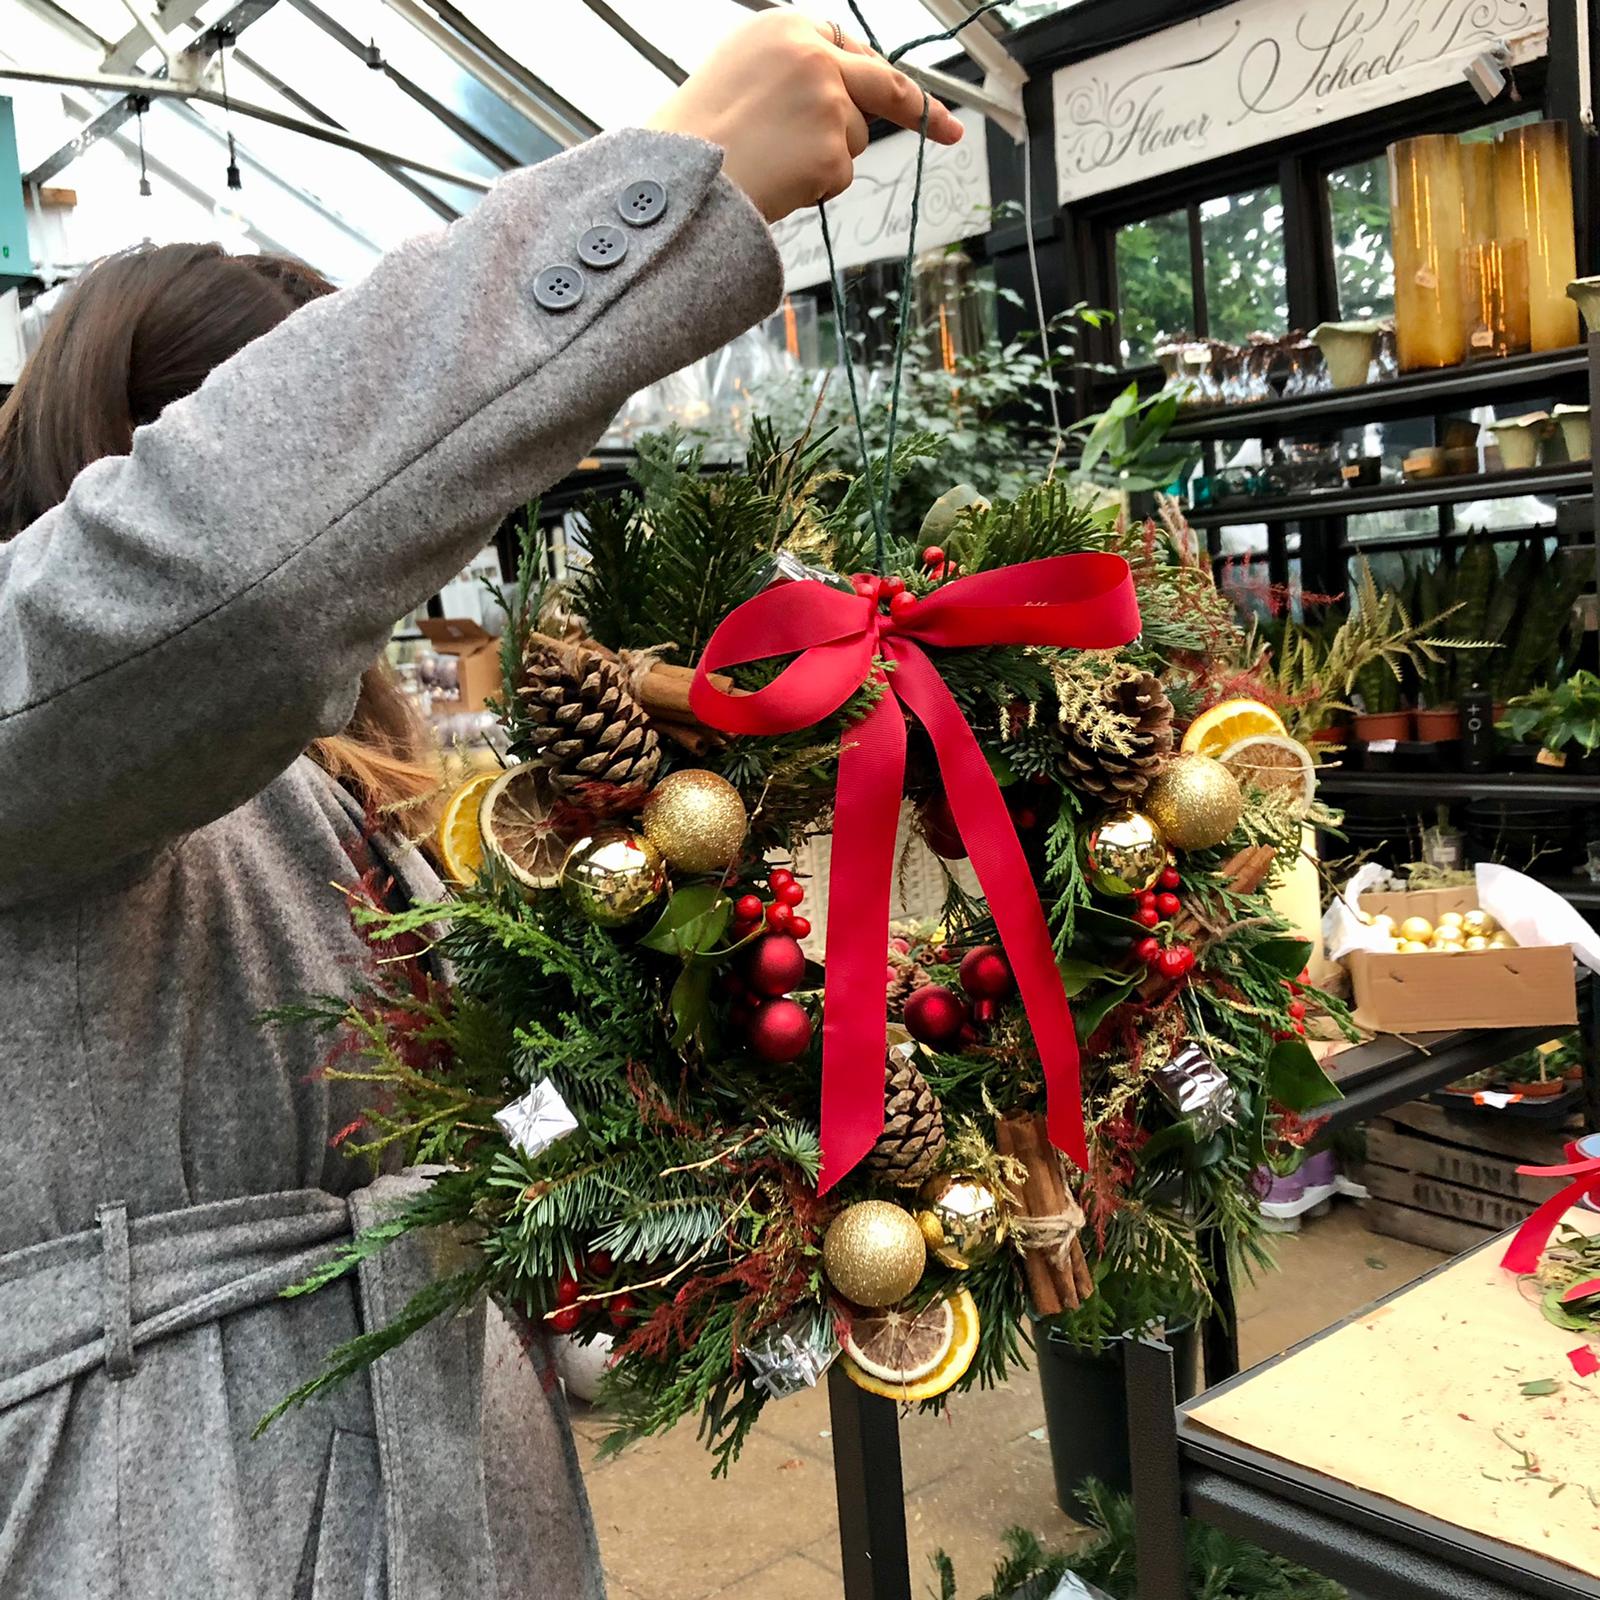 The Flower Station - The Art of Wreath Making